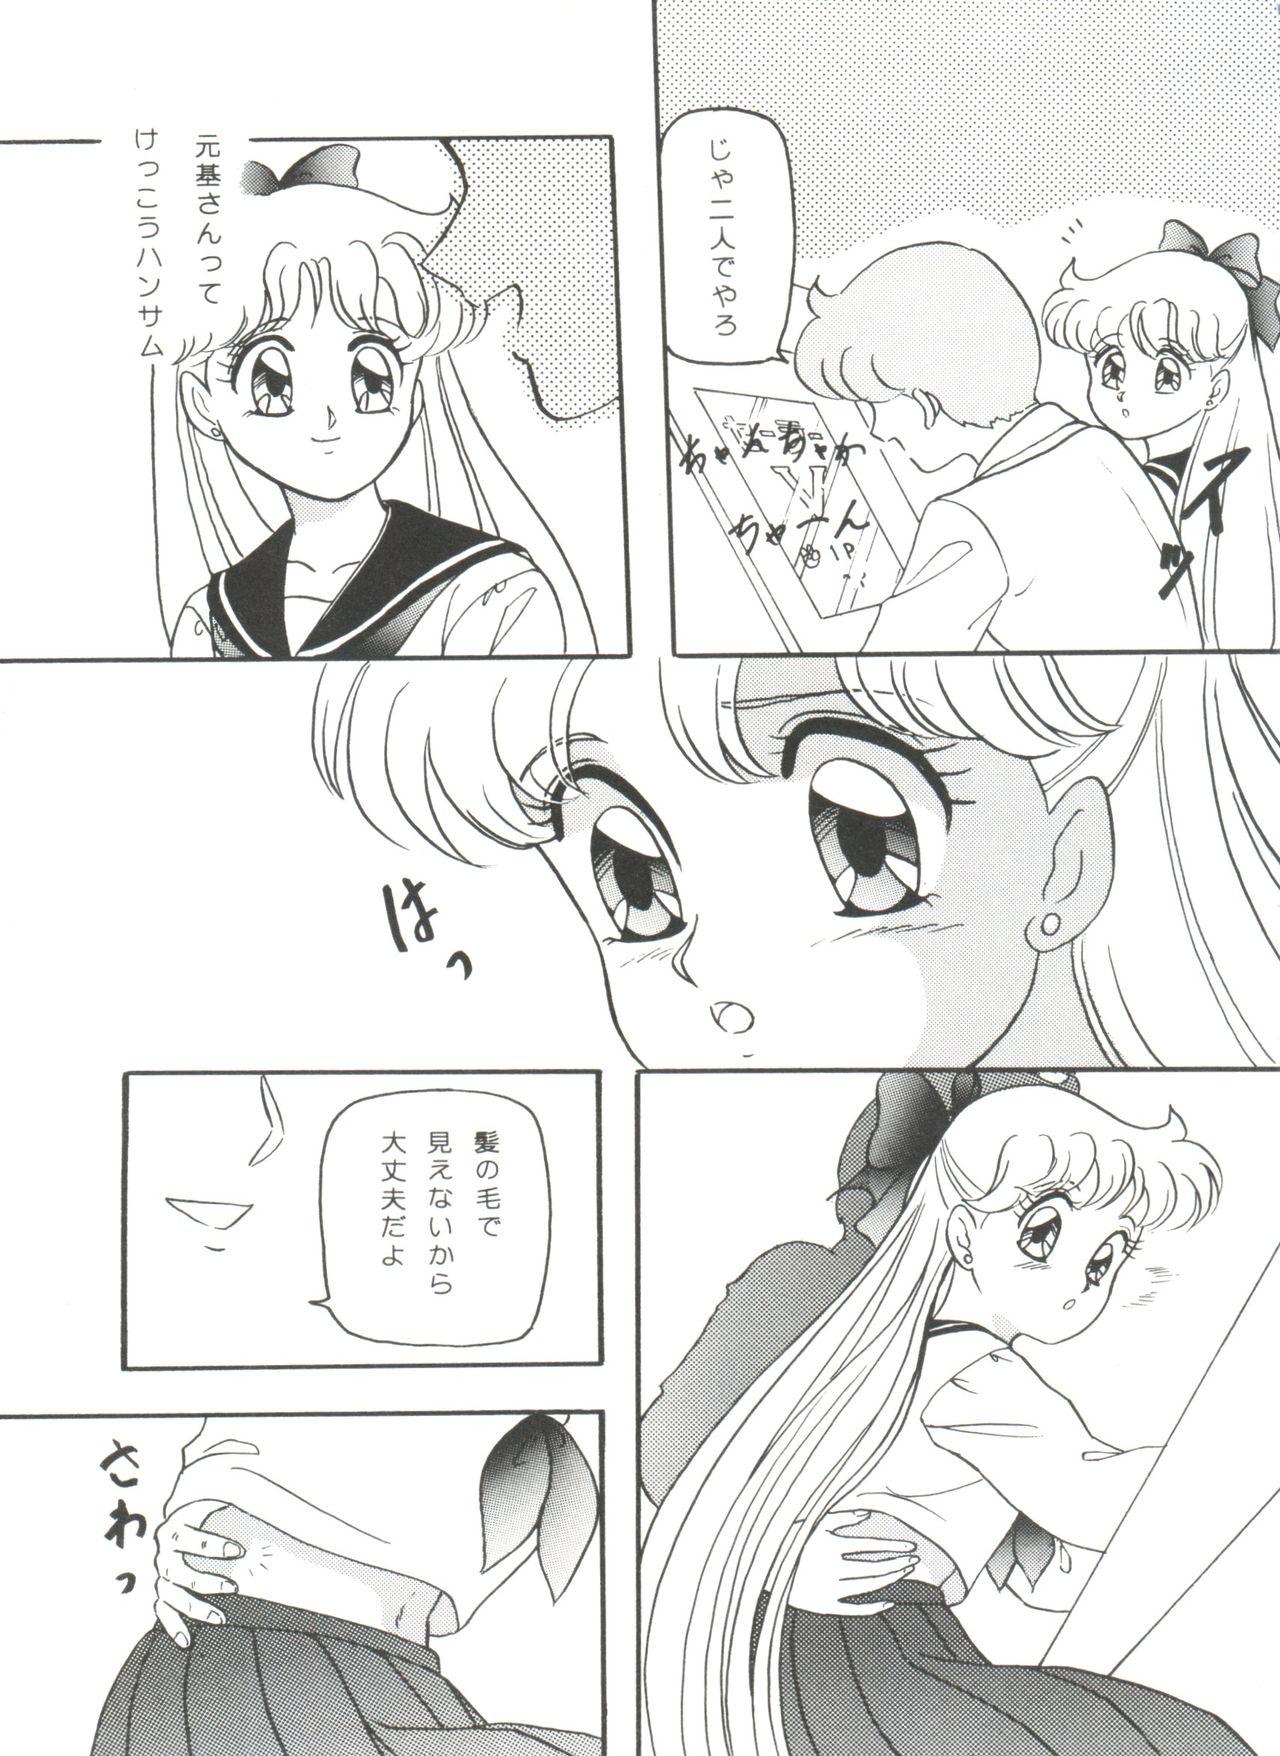 Jerkoff From the Moon - Sailor moon Negro - Page 7